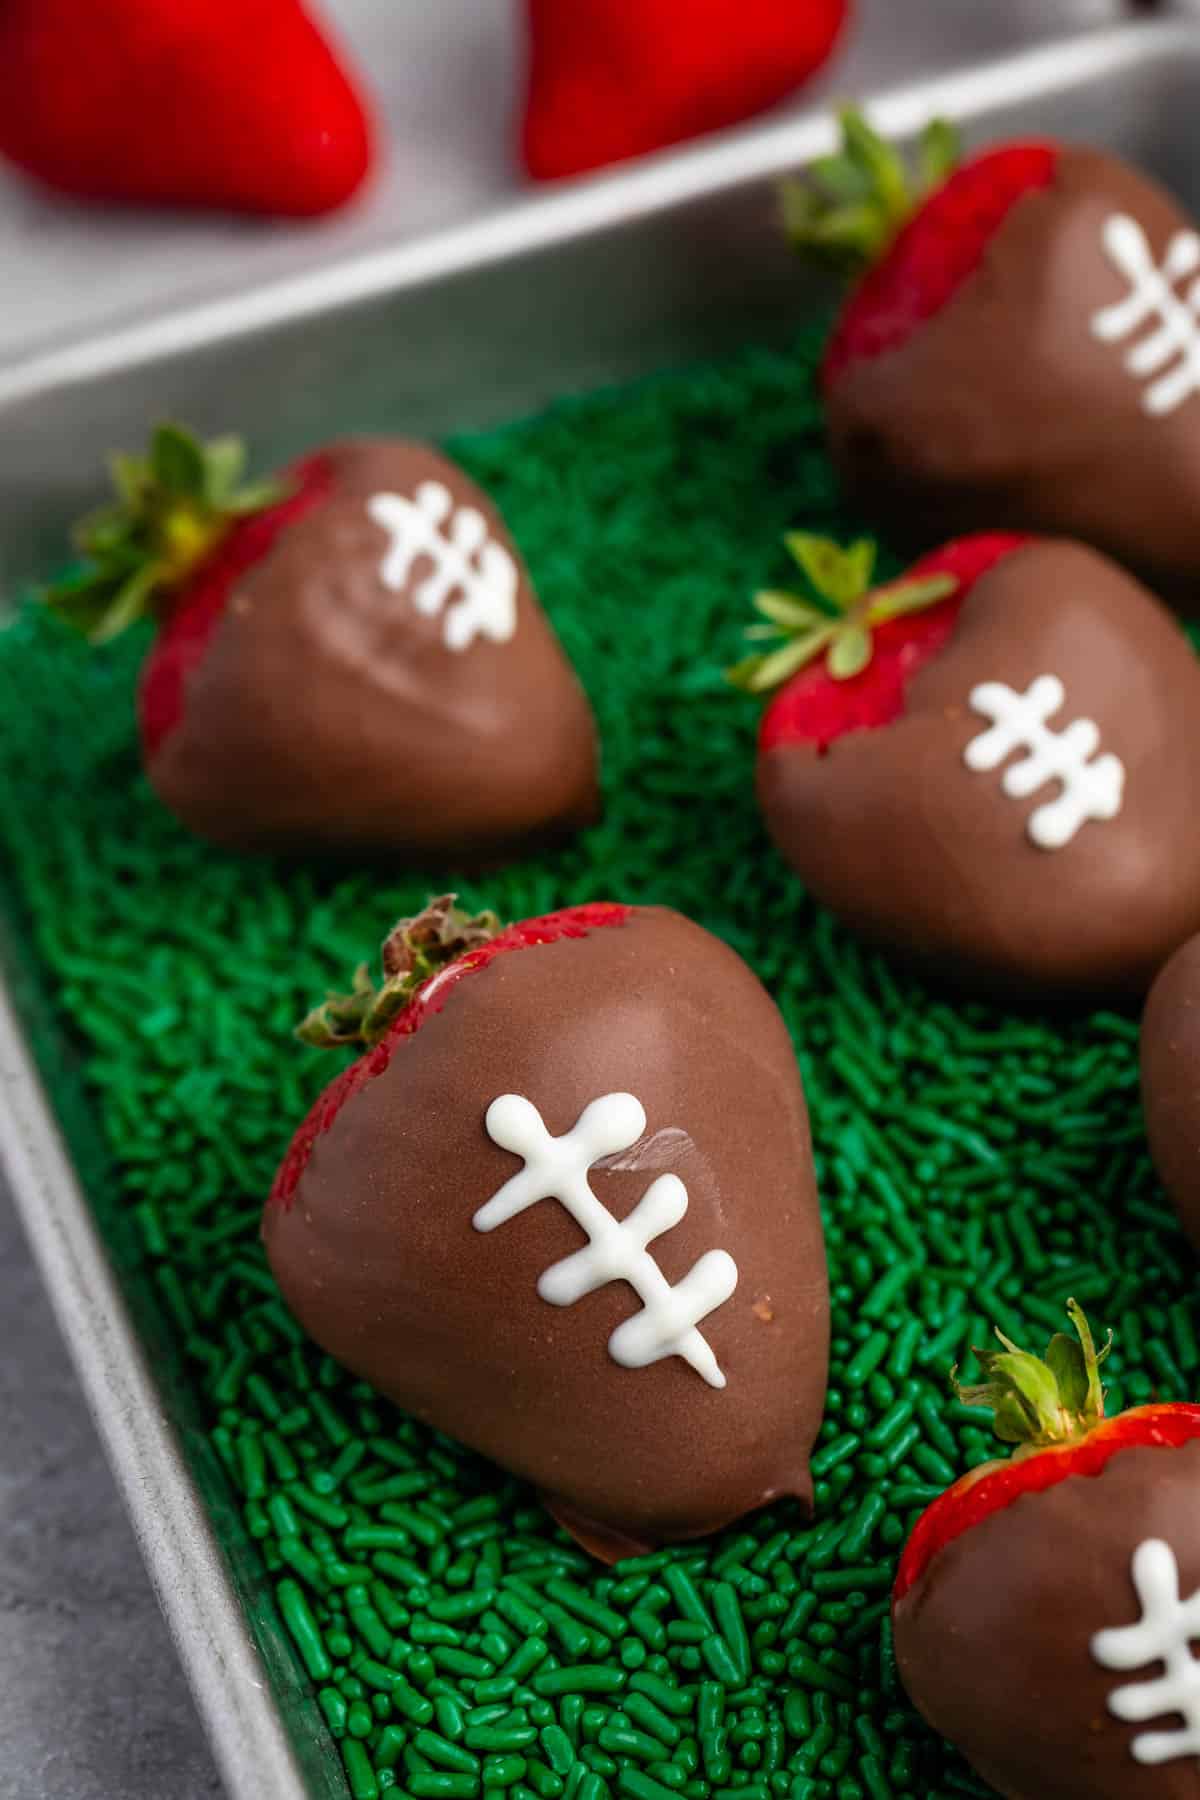 chocolate covered strawberries with white laces drawn on top with green sprinkles underneath.